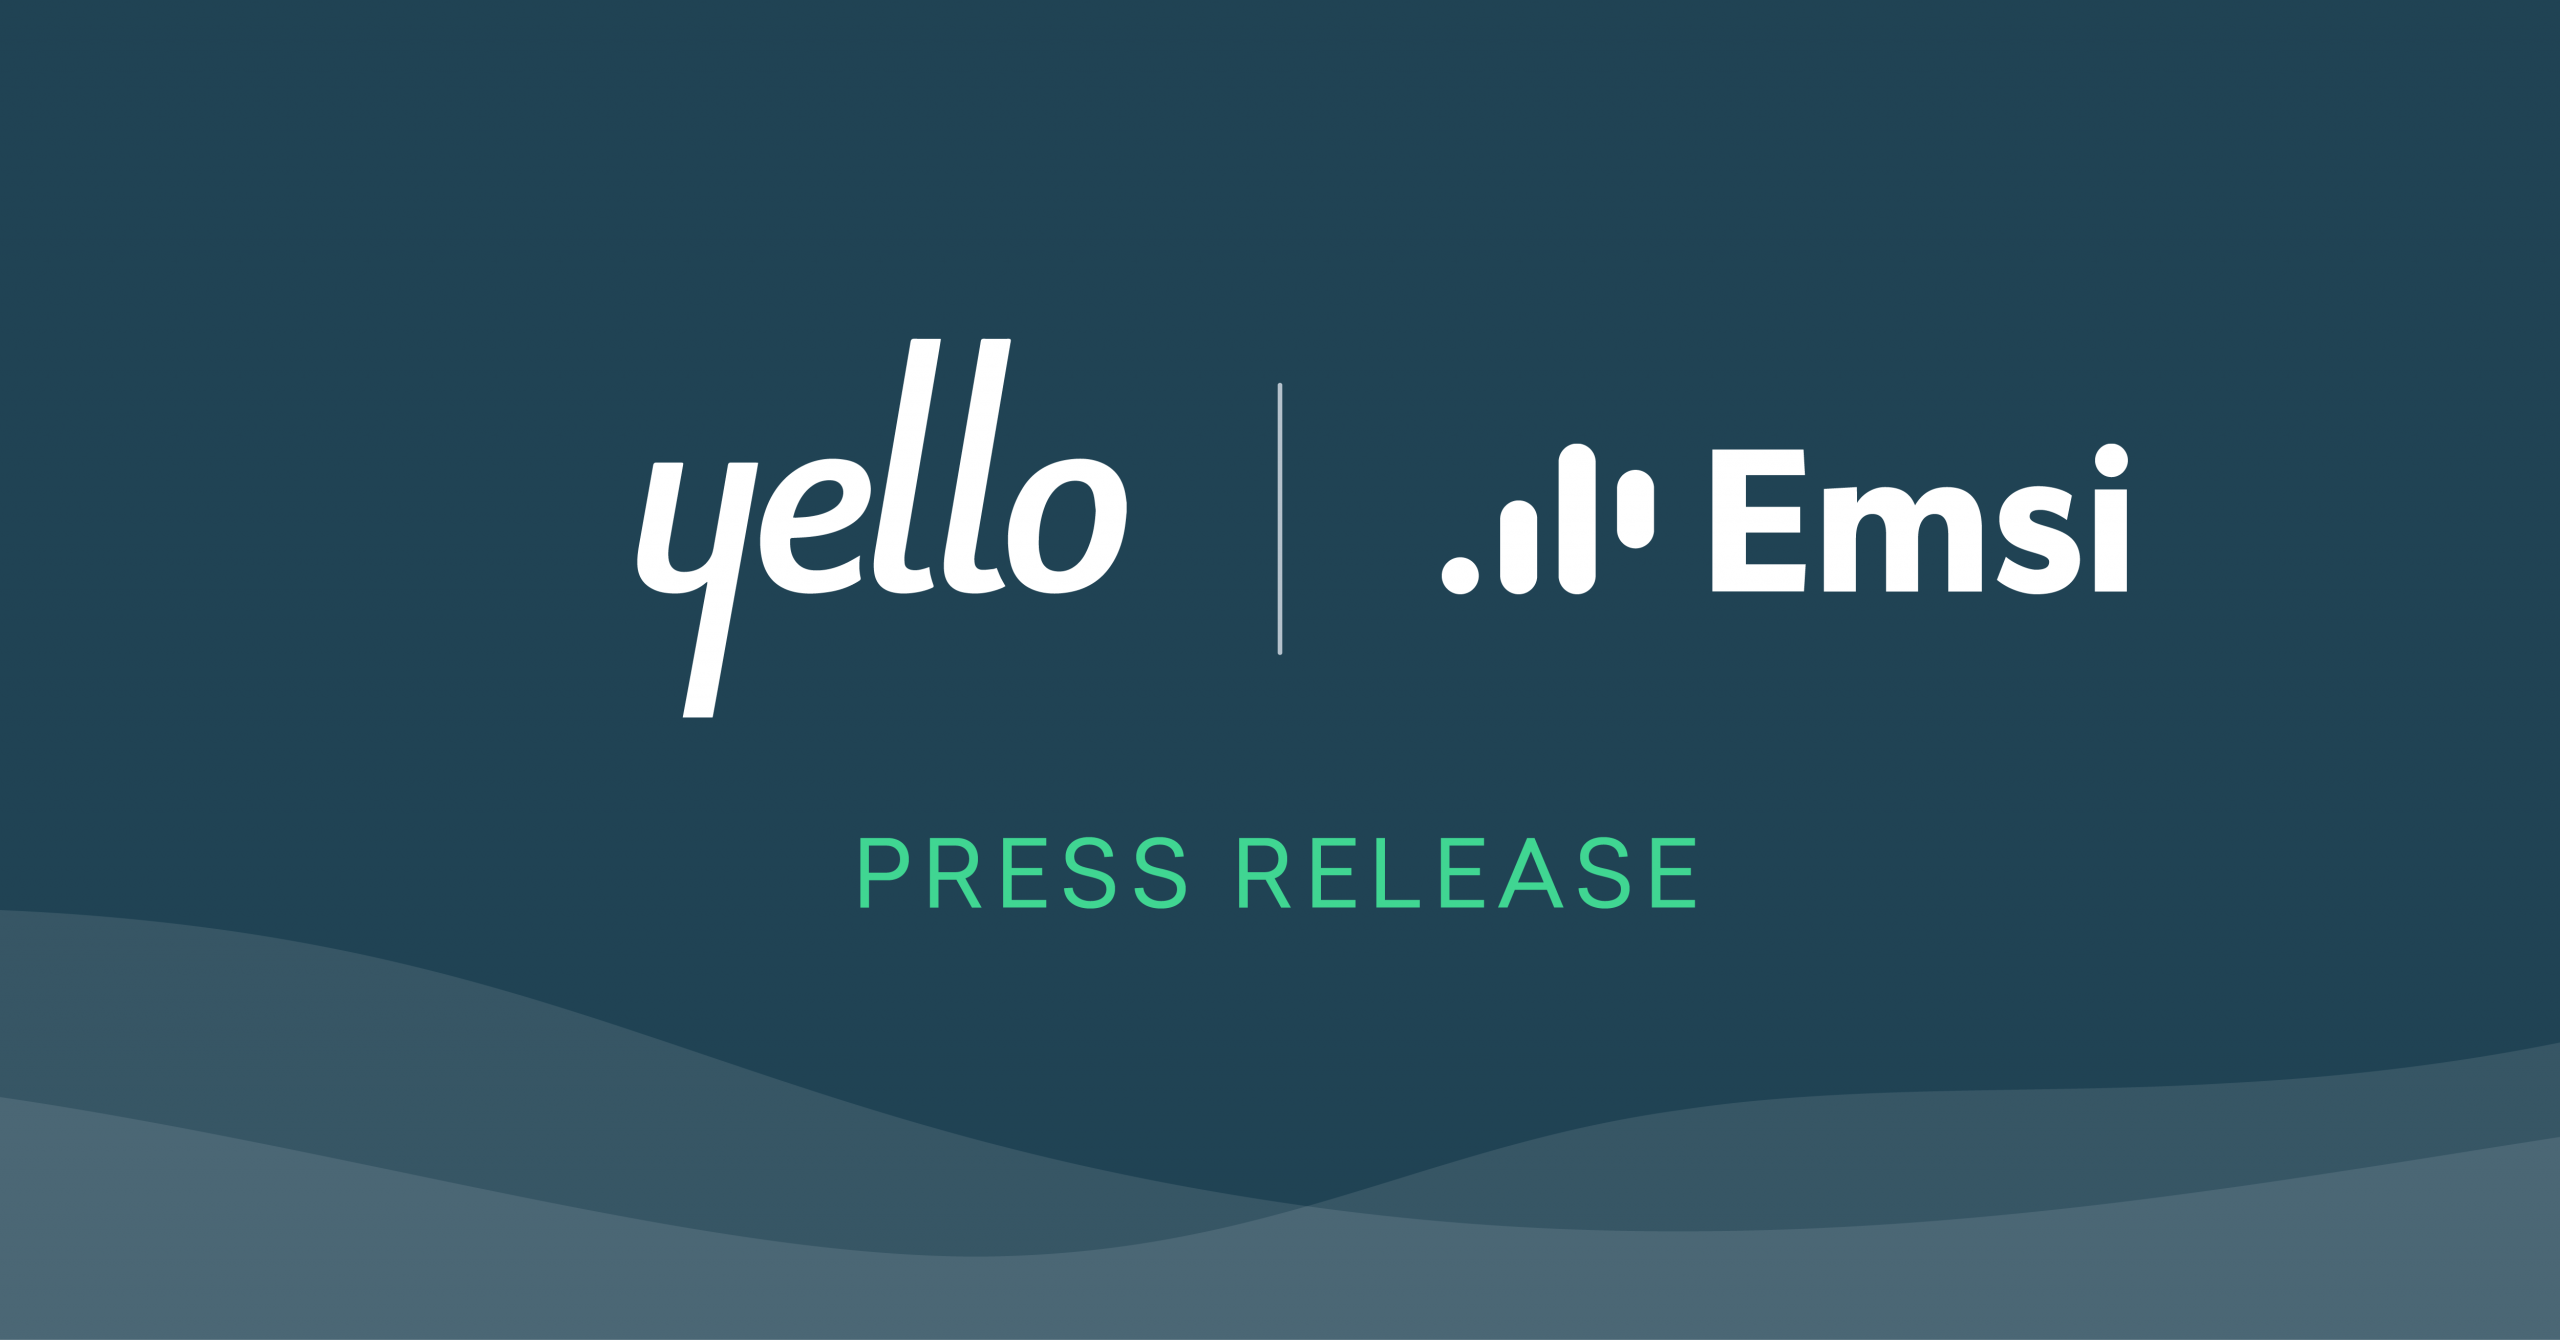 Emsi and Yello Partner to Build a Better Talent Experience